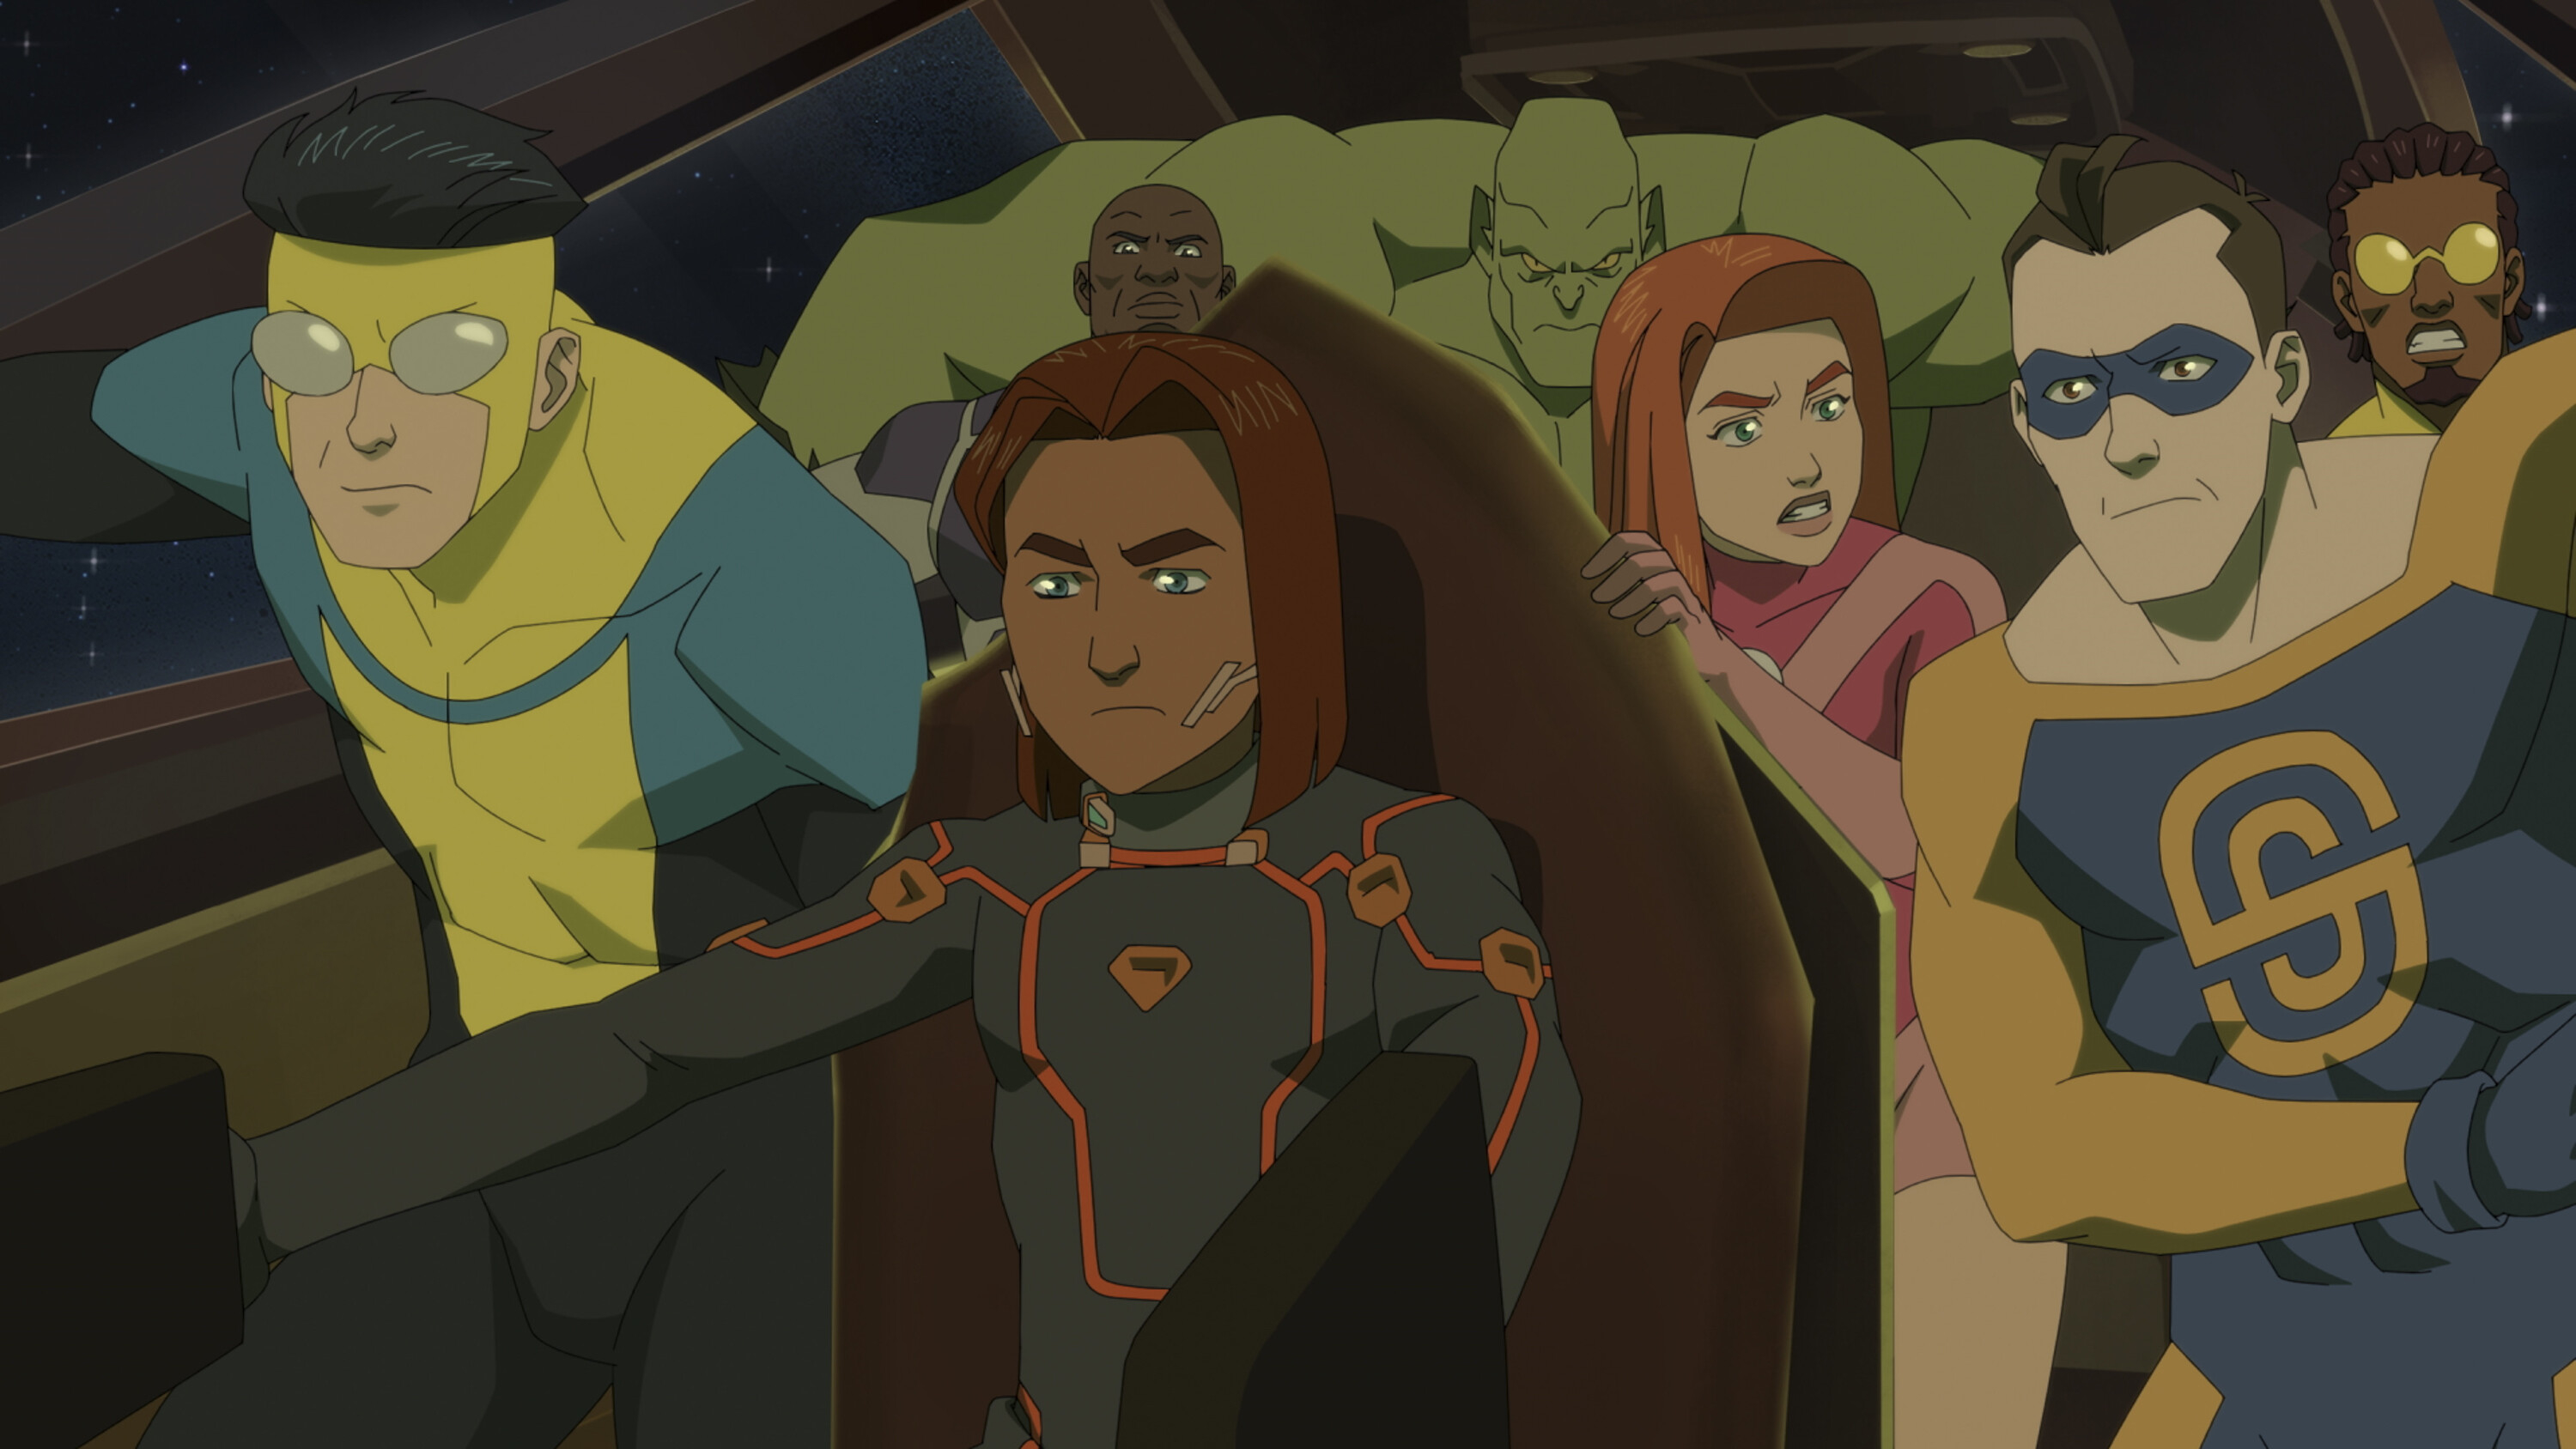 Animated characters from &#x27;Invincible&#x27; show, including protagonist Mark Grayson, in a spacecraft, looking determined